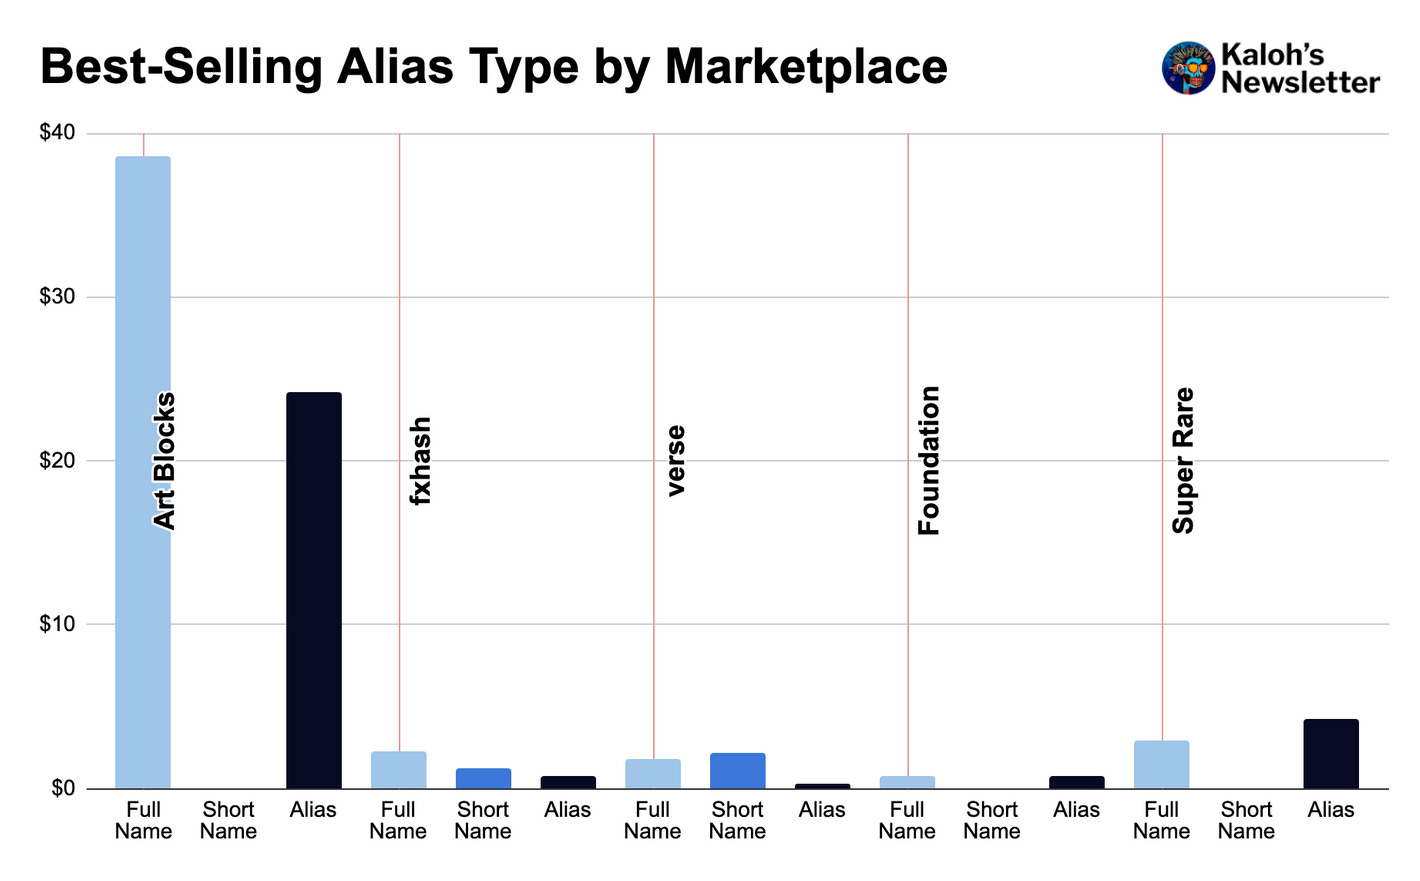 Best-selling alias type by marketplace from October 2022 to October 2023.